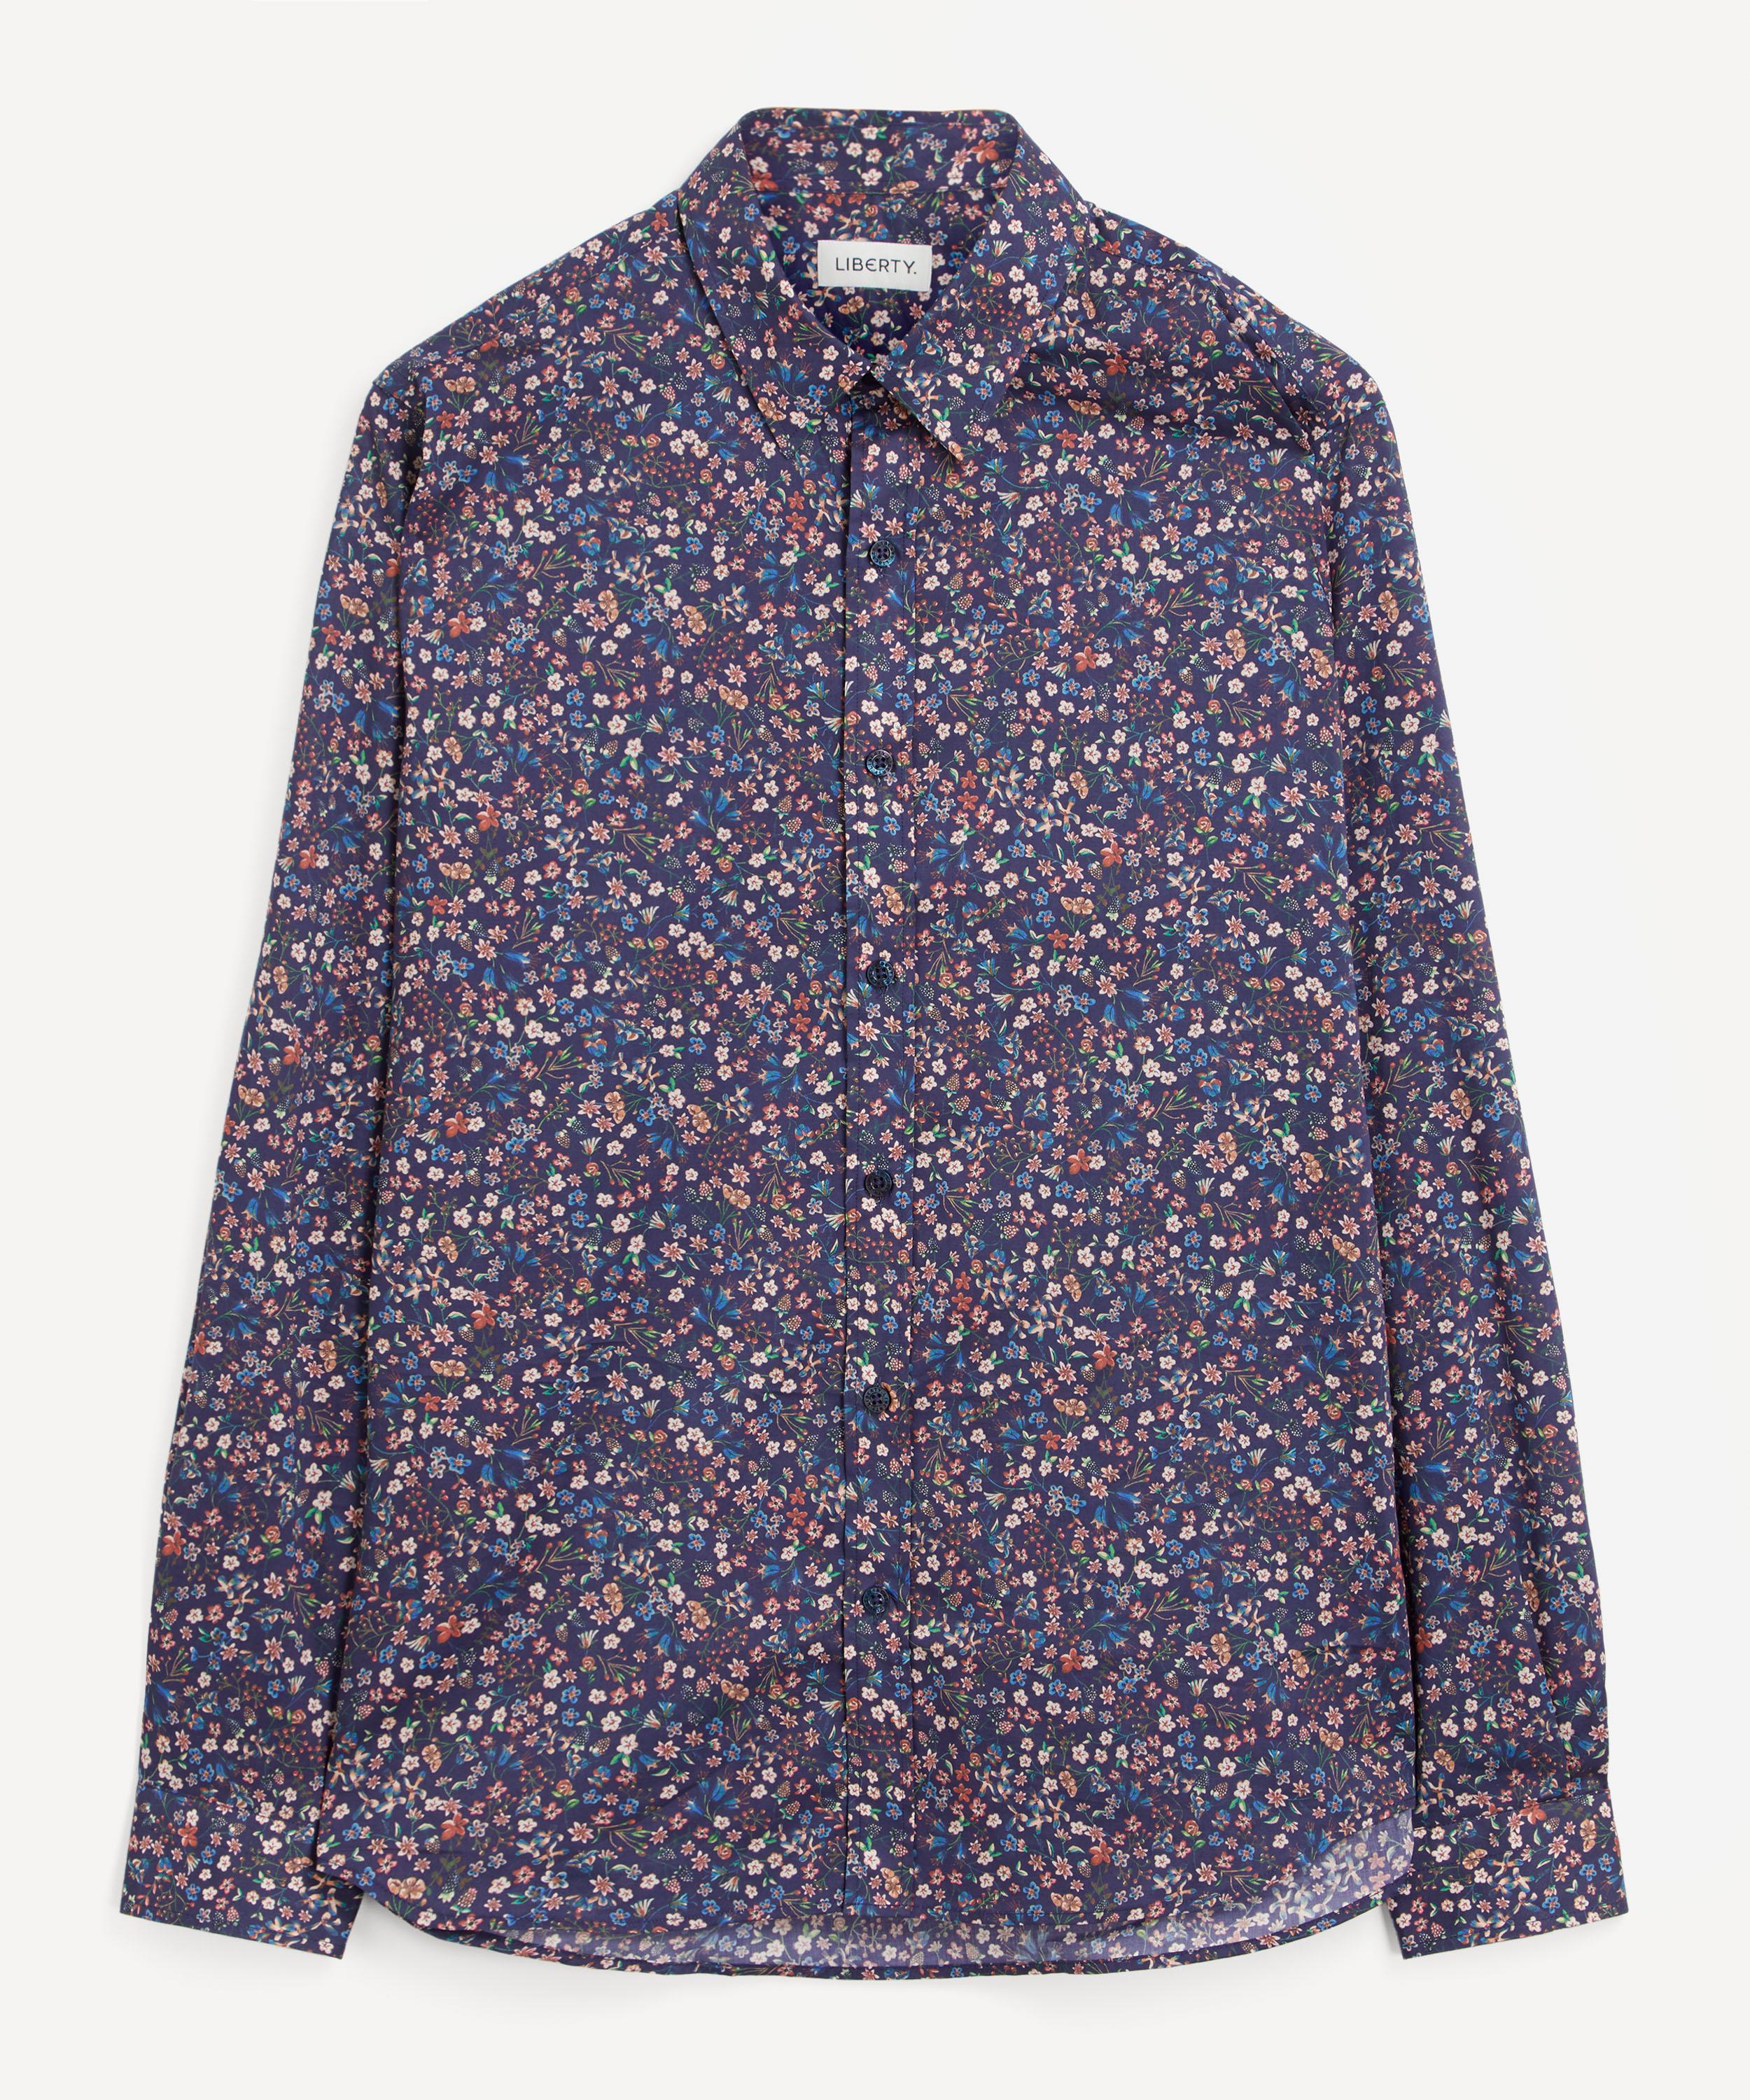 Liberty Donna-leigh Tana Lawn™ Cotton Casual Classic Slim Fit Shirt